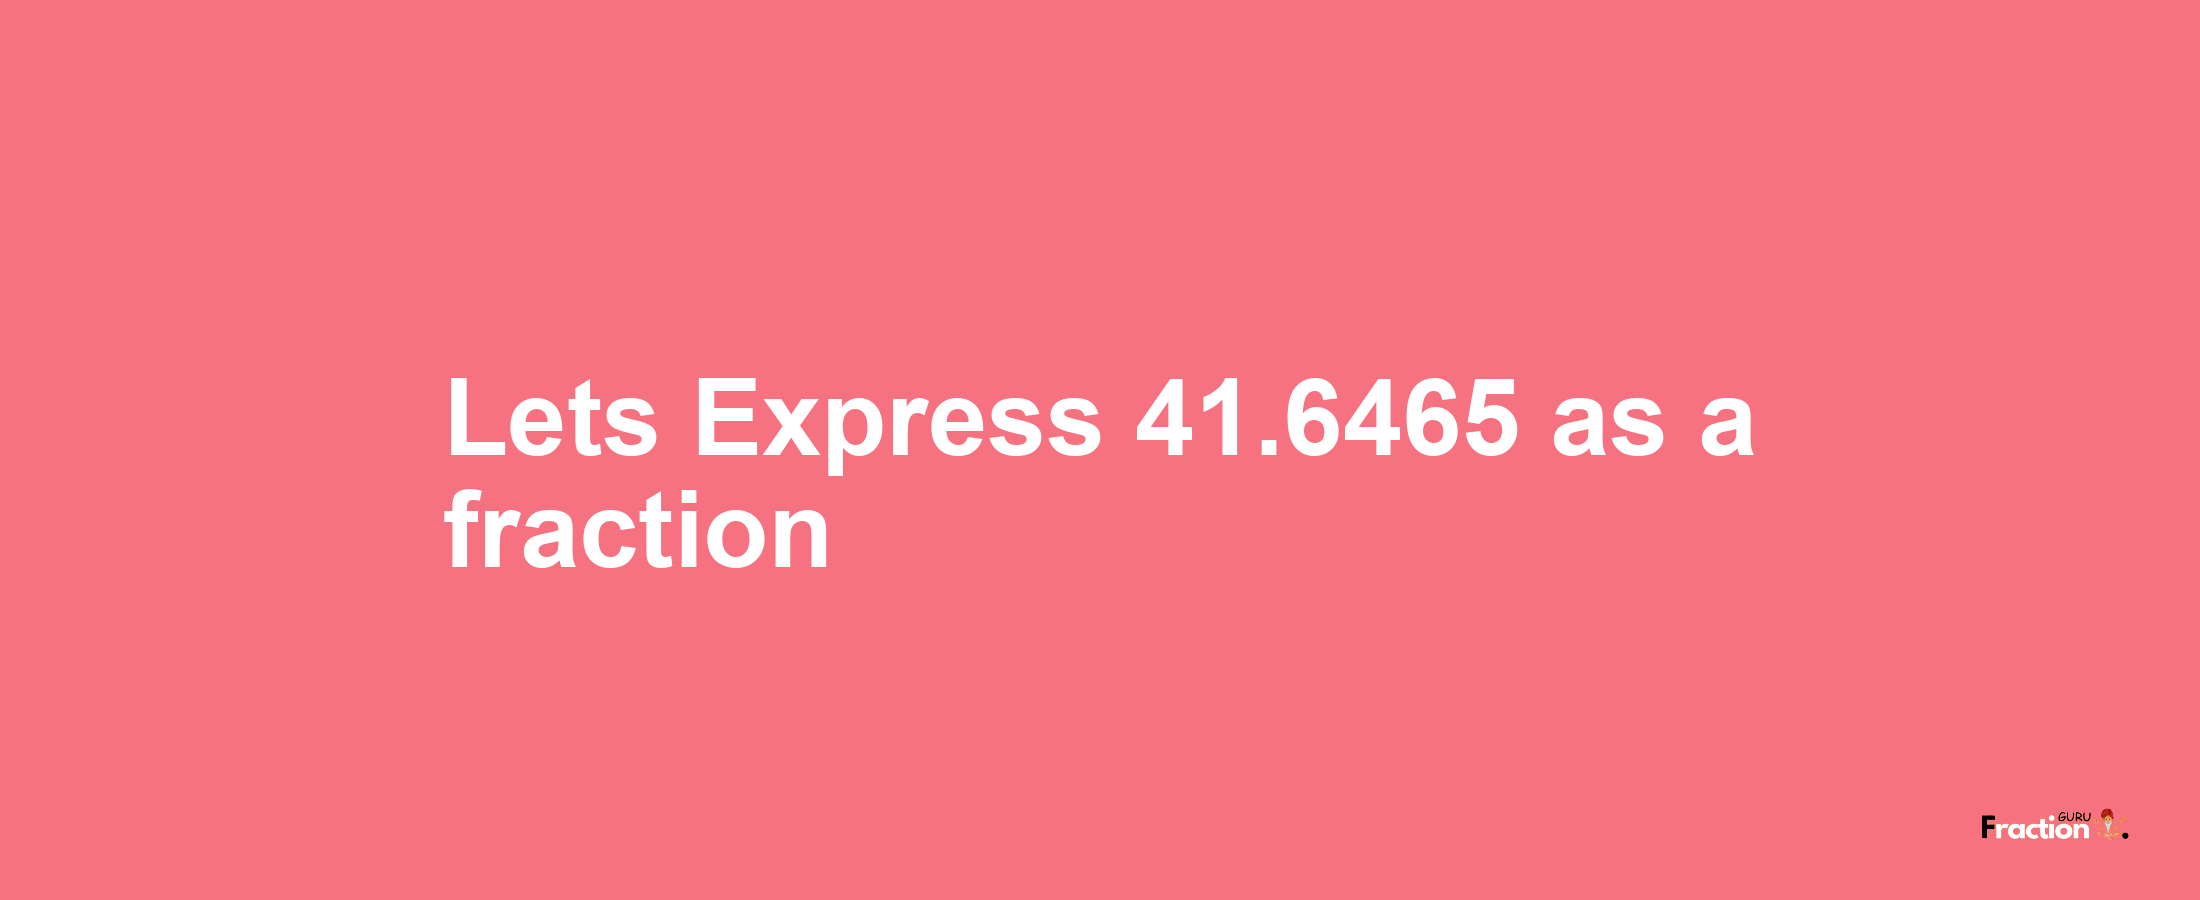 Lets Express 41.6465 as afraction